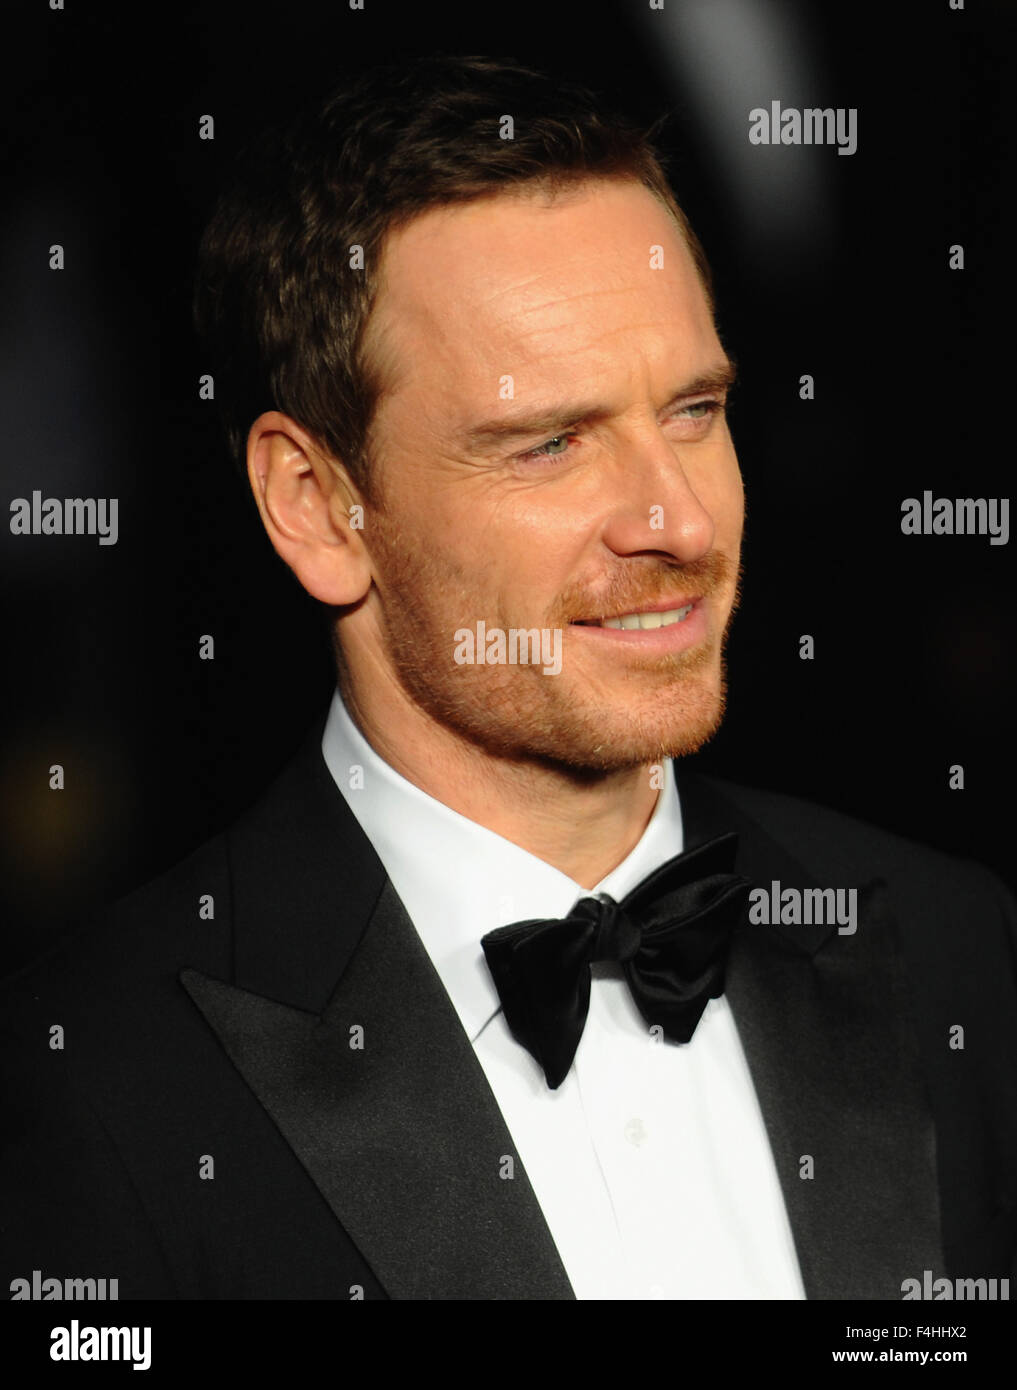 London, UK. 18th Oct, 2015. Michael Fassbender attends a gala screening of 'Steve Jobs' on the closing night of the BFI London Film Festival at Odeon Leciester Square. Credit:  Ferdaus Shamim/ZUMA Wire/Alamy Live News Stock Photo